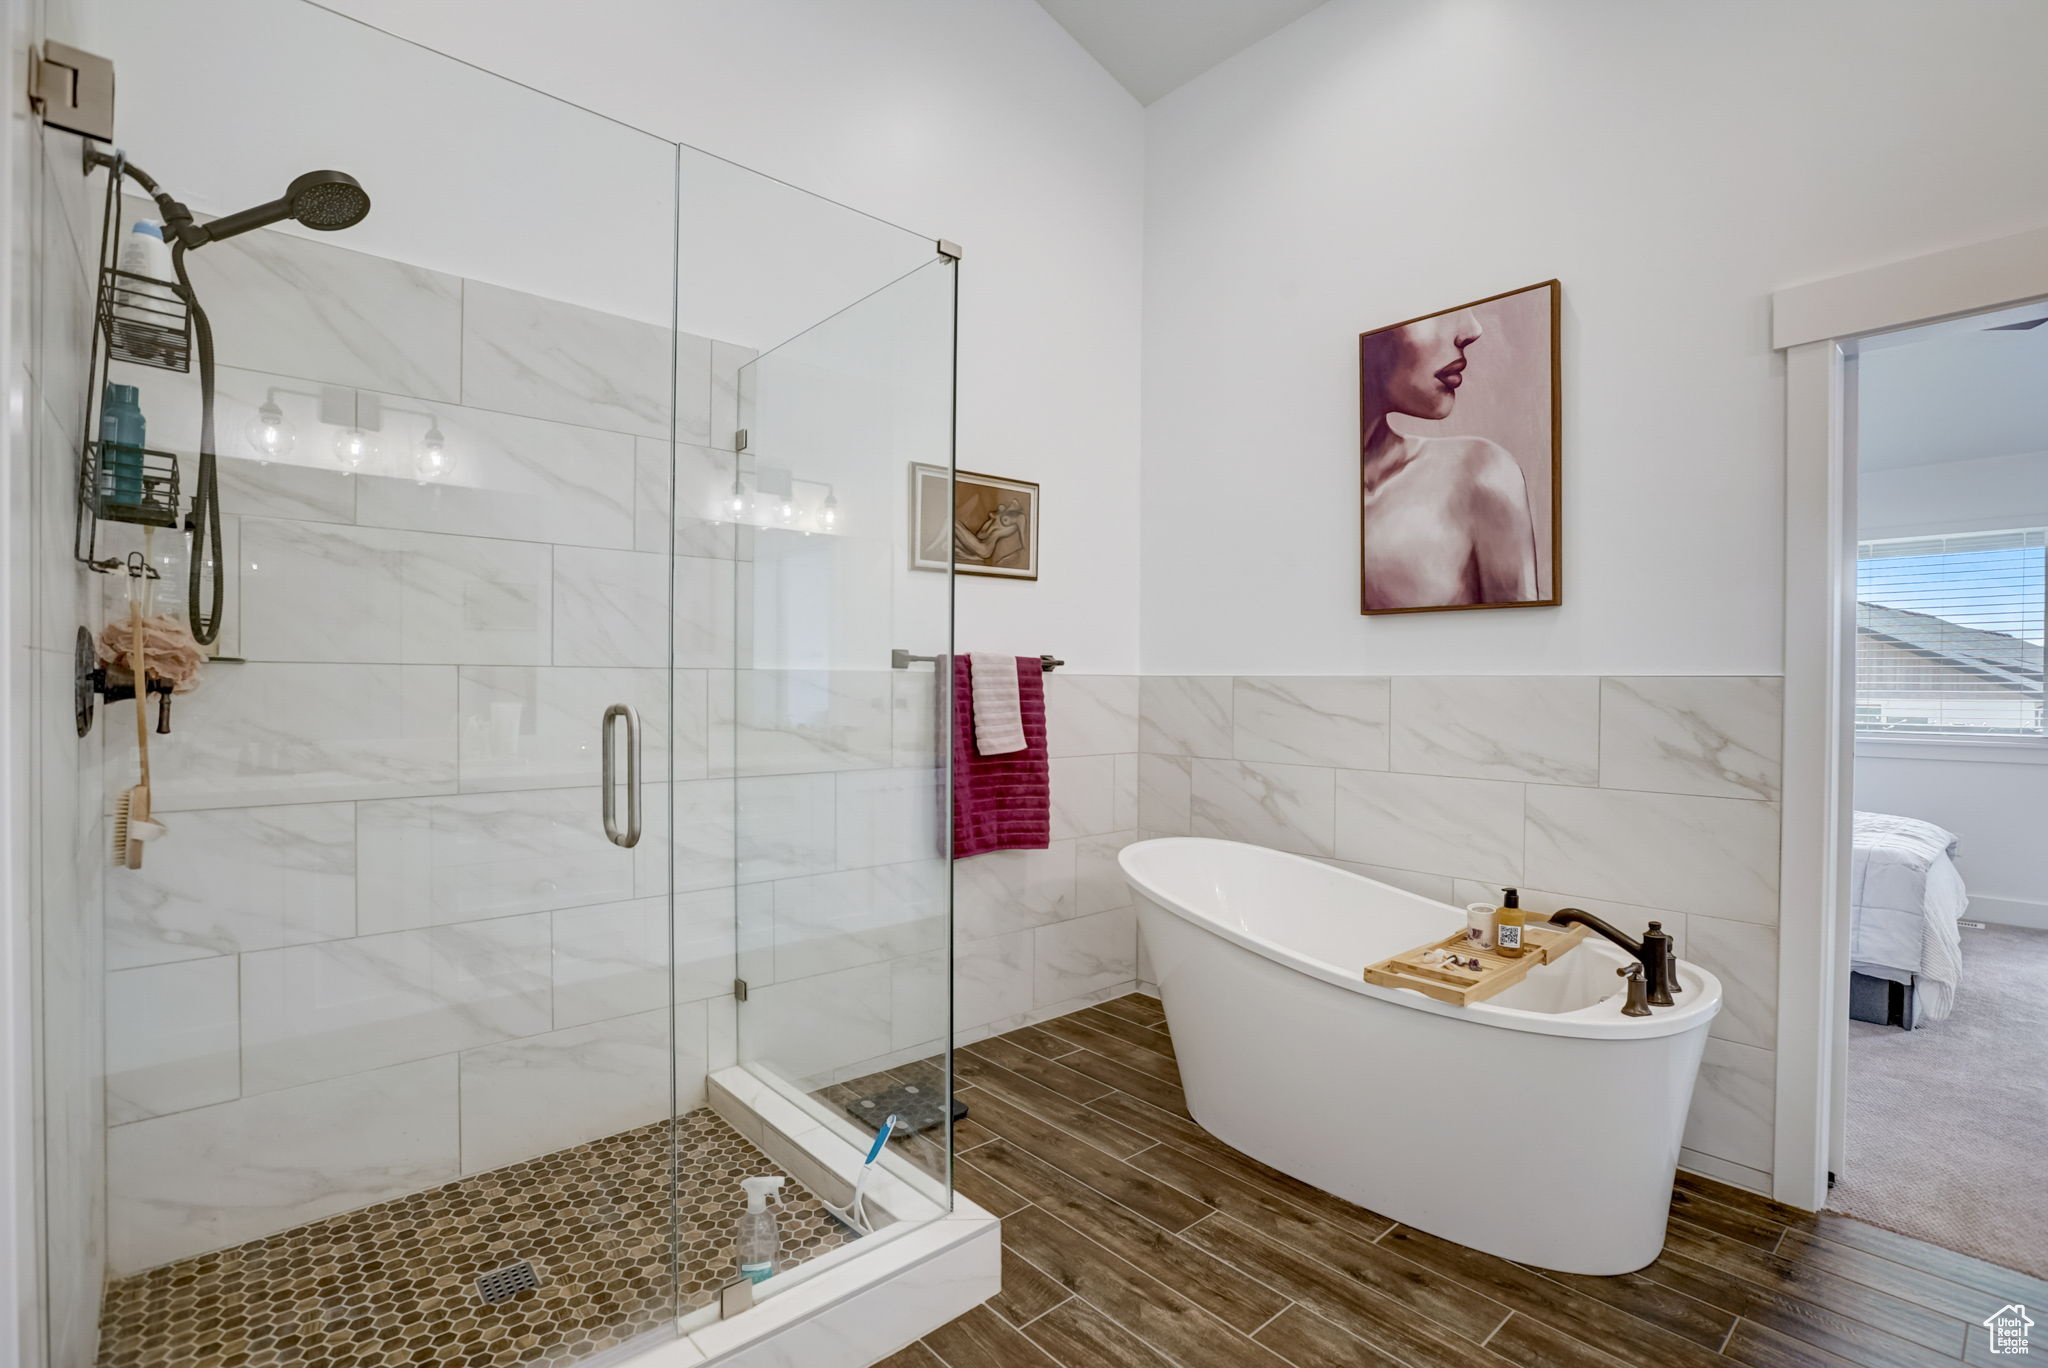 Owner's bathroom with tile walls and plus walk in shower